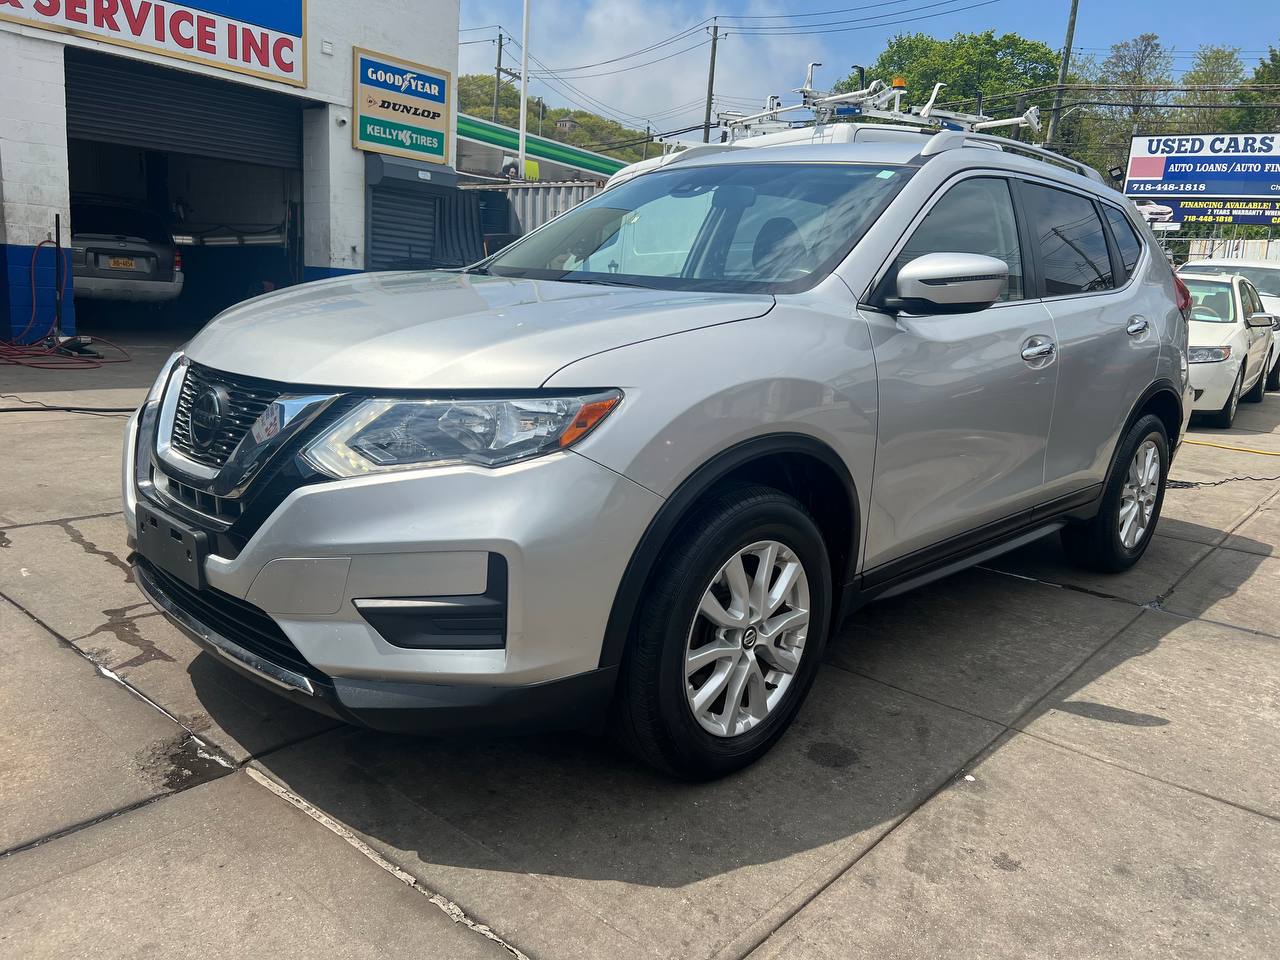 Used Car - 2019 Nissan Rogue SV for Sale in Staten Island, NY